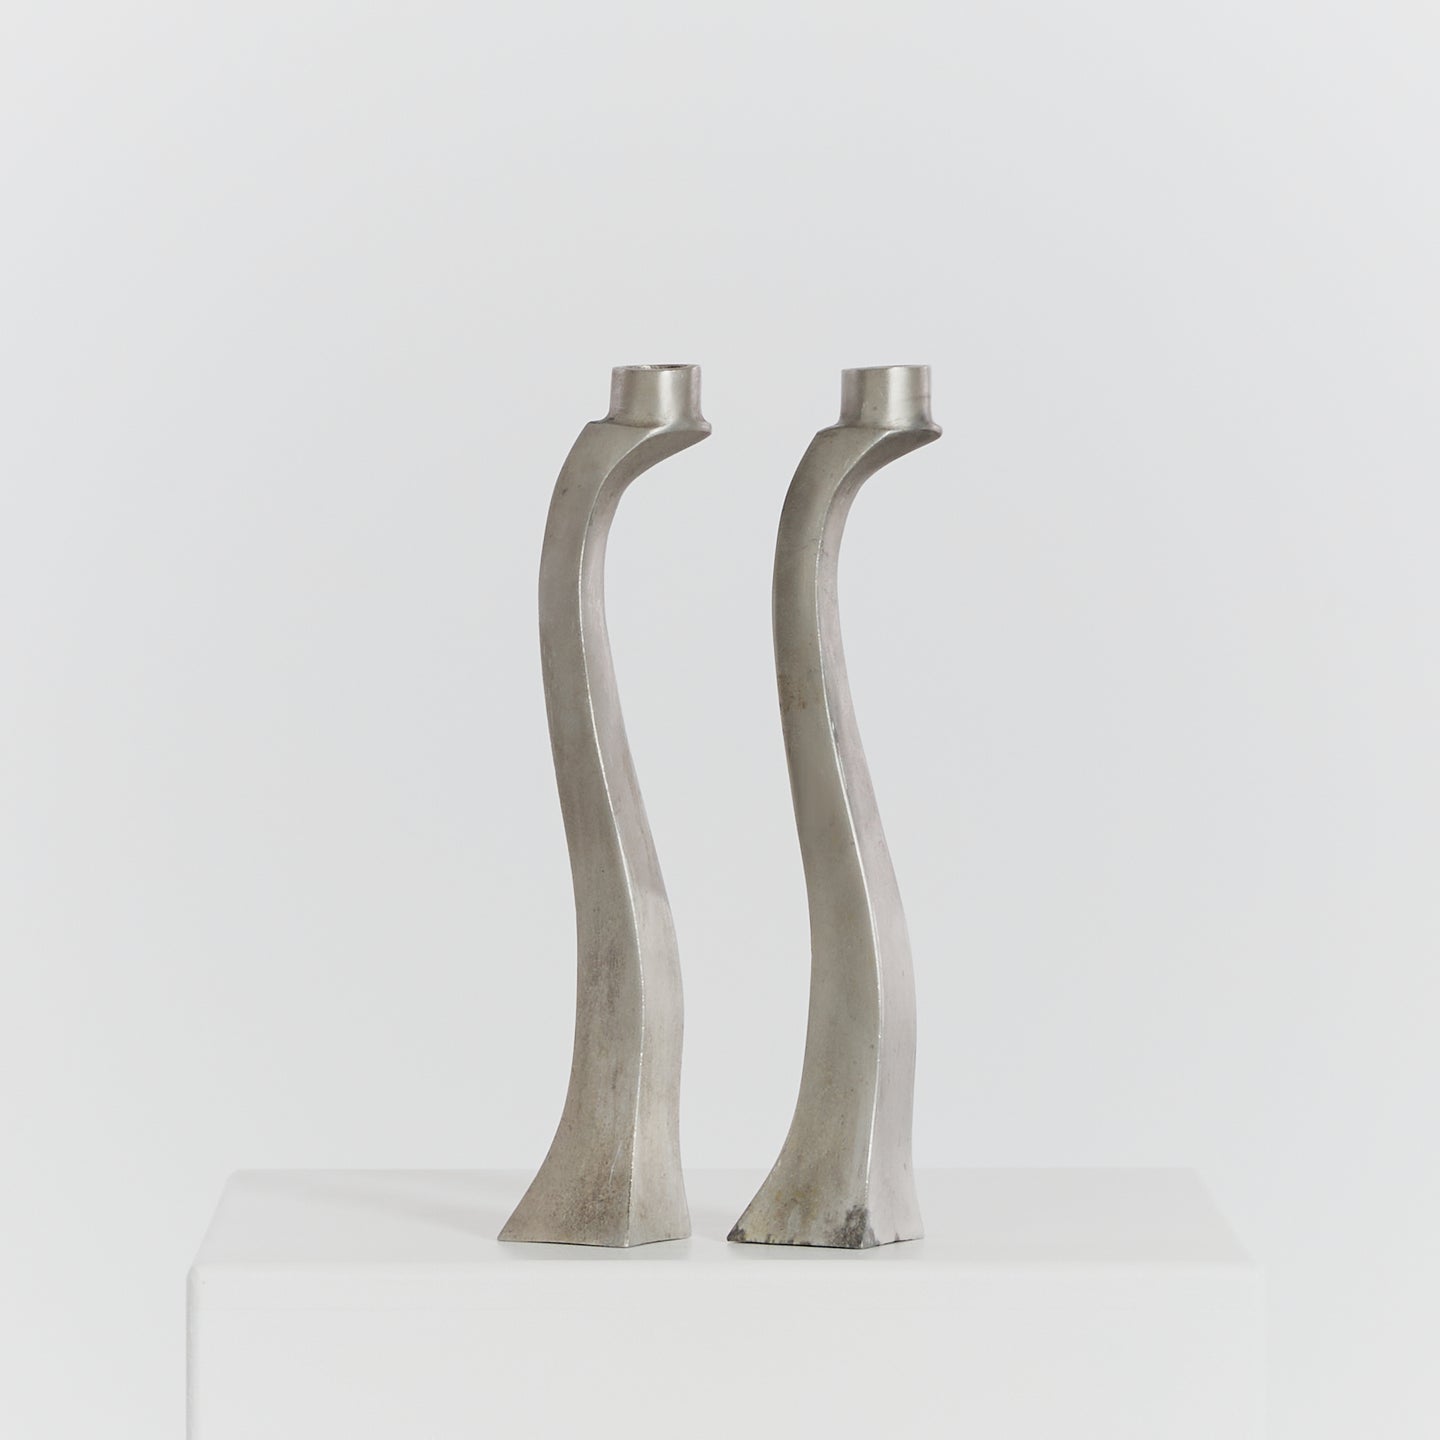 Aluminium curved candlesticks, pair - HIRE ONLY